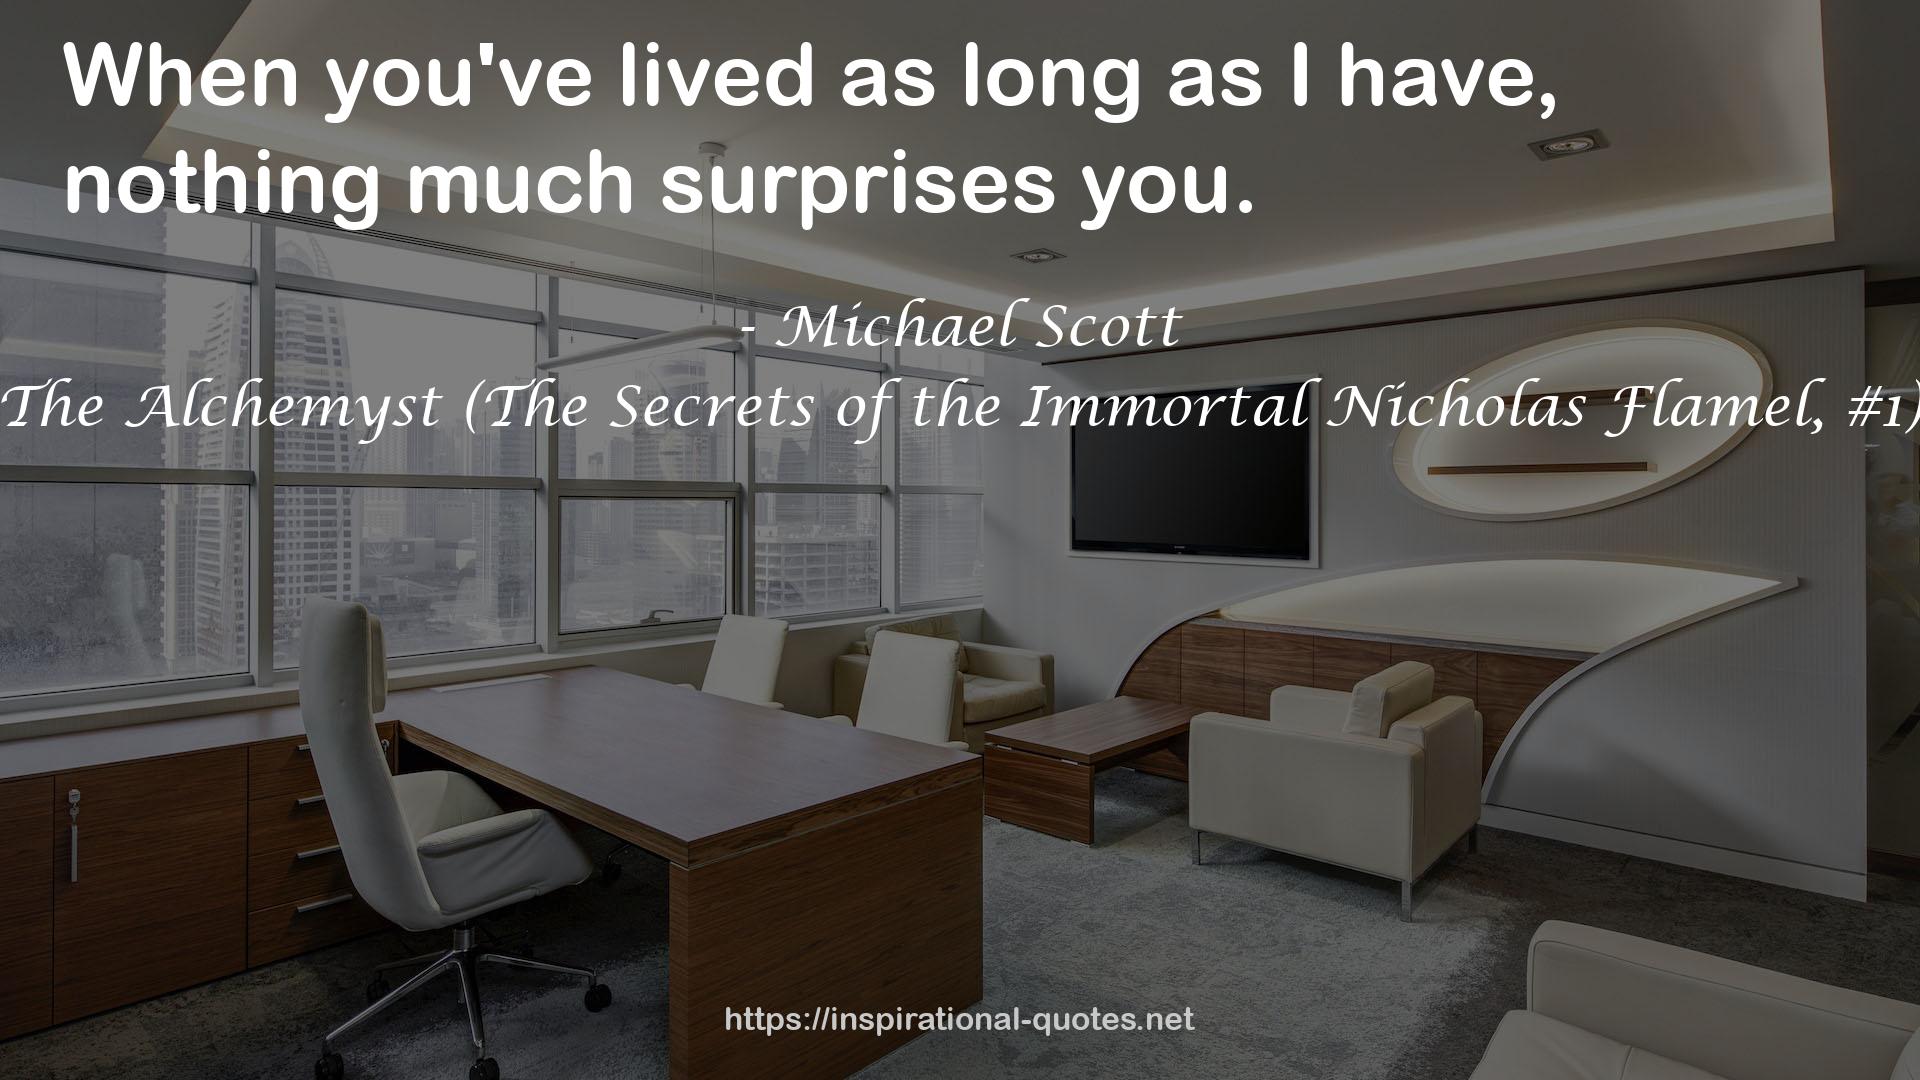 The Alchemyst (The Secrets of the Immortal Nicholas Flamel, #1) QUOTES